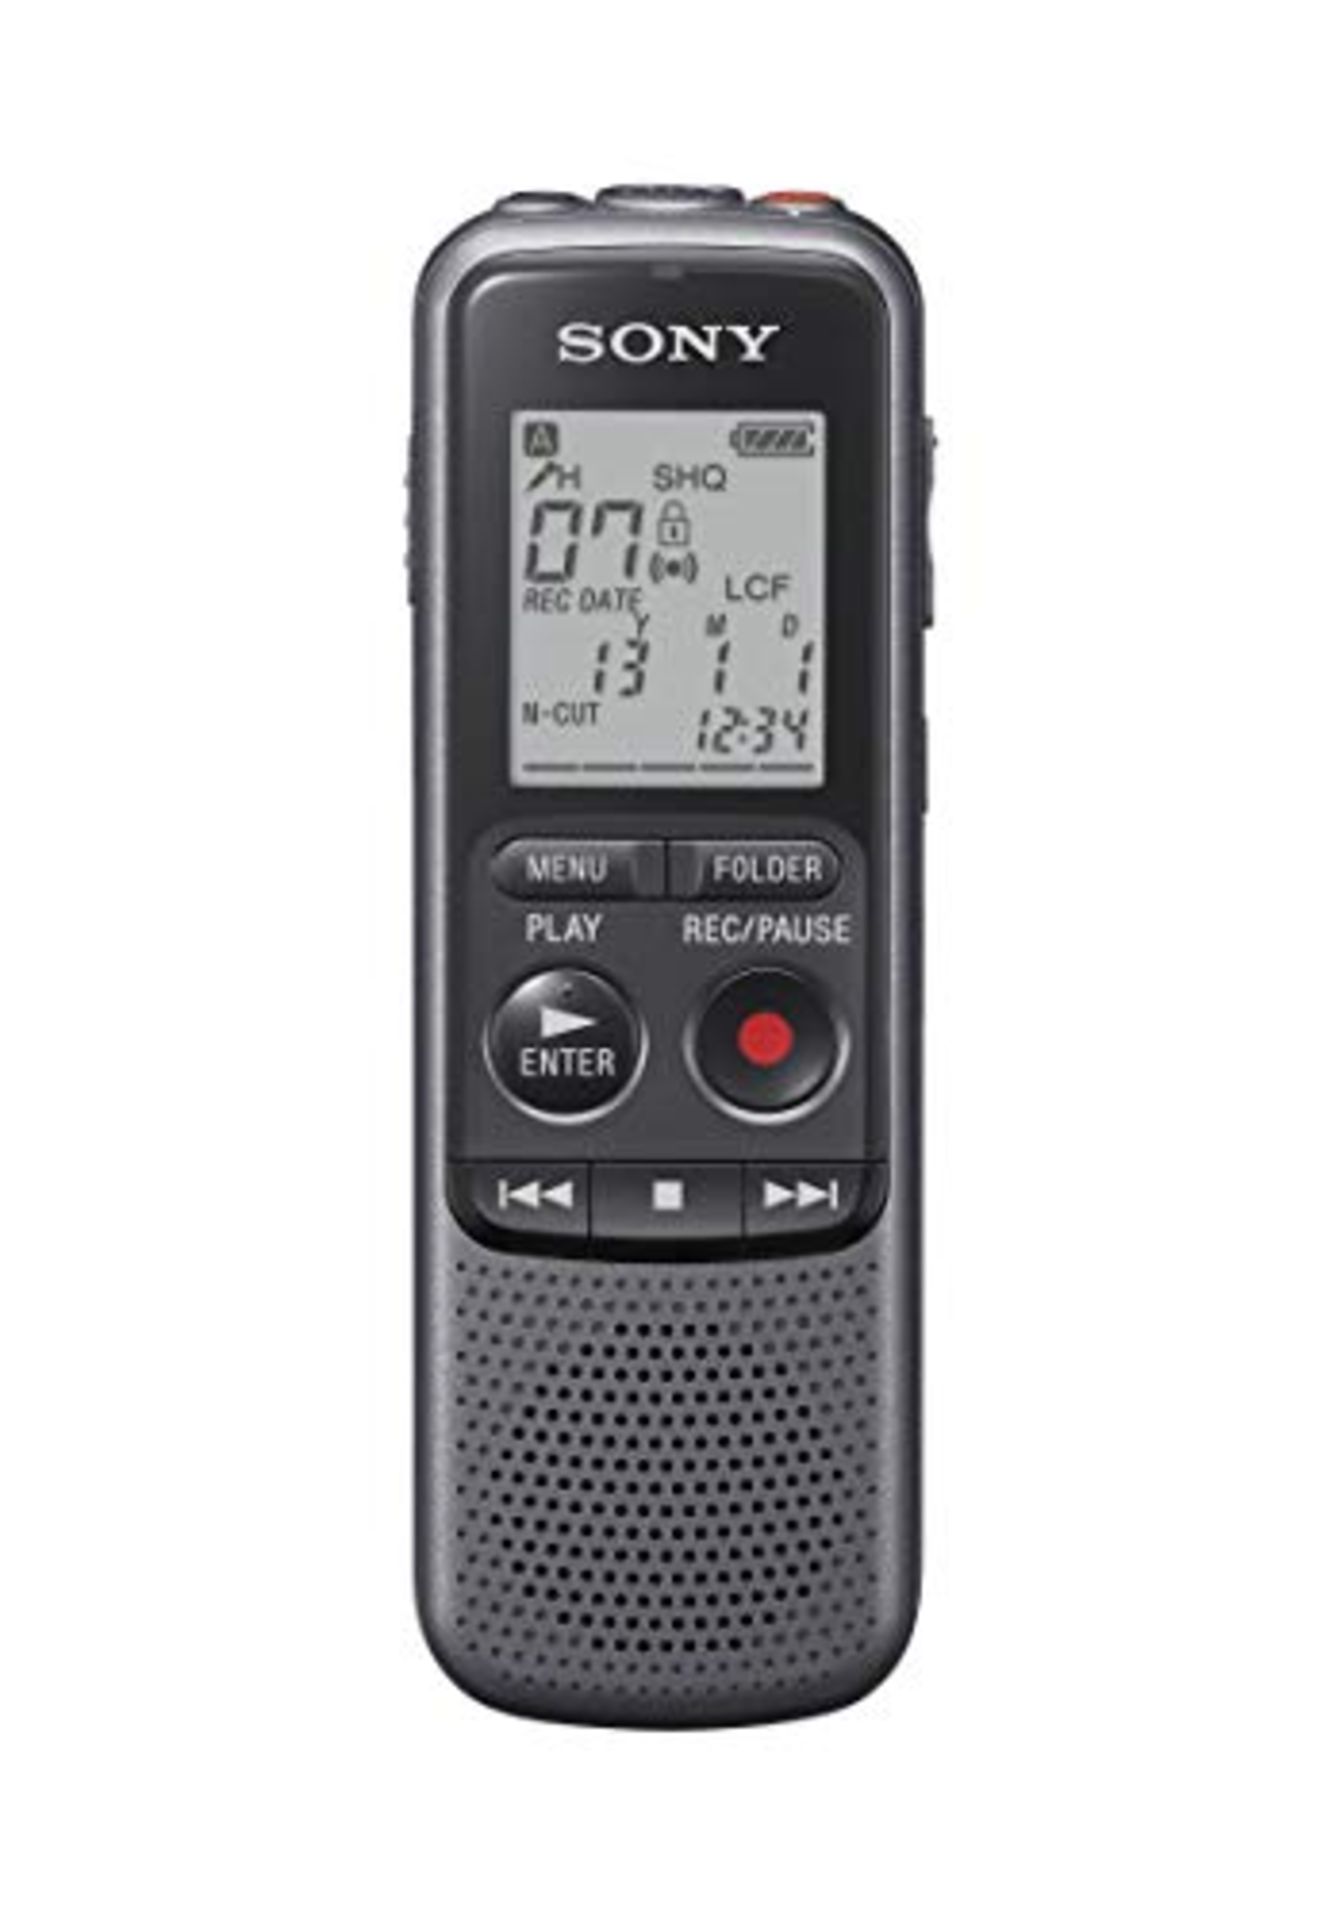 [NEW] Sony ICD-PX240 Digital Mono Recorder, Built-in Speaker, Headphone and Microphone